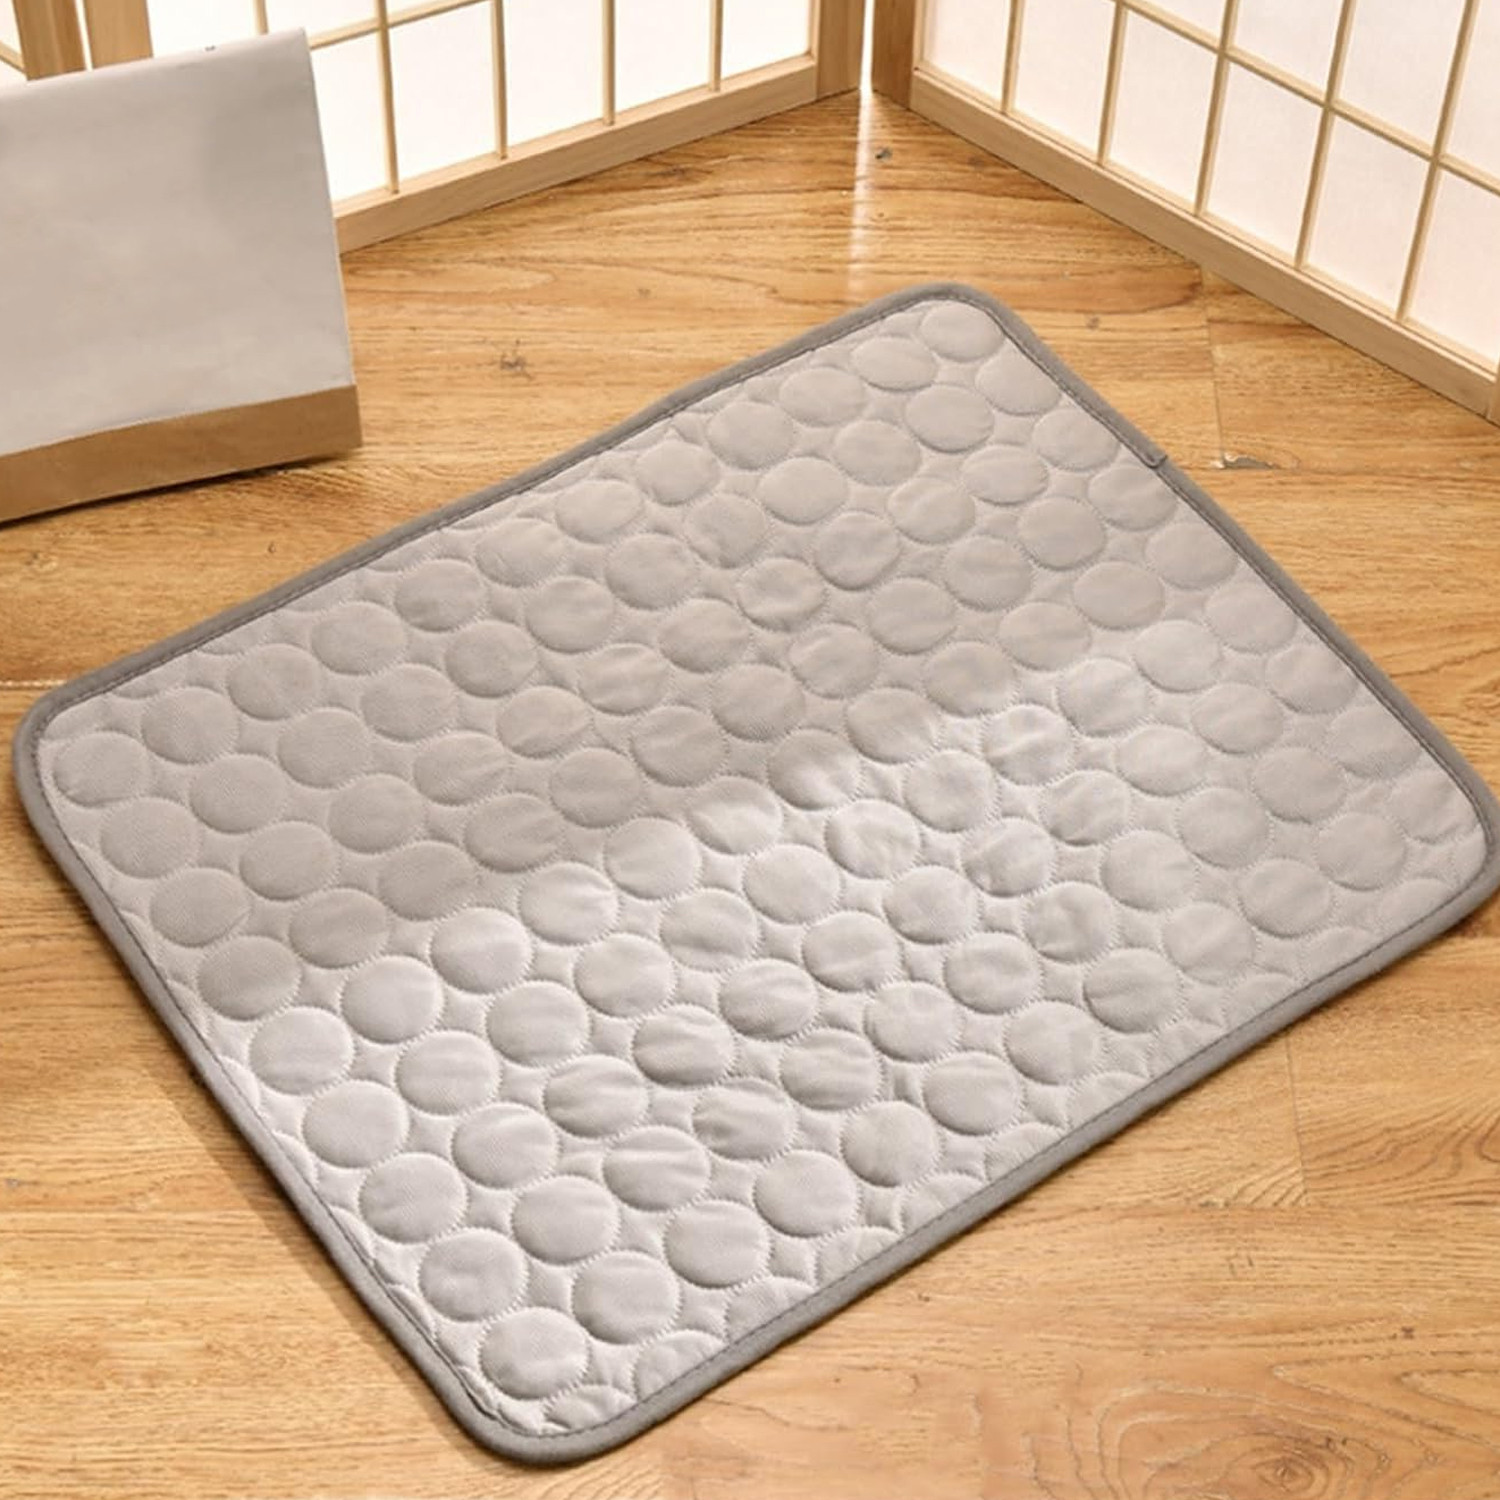 Kuber Industries Rectangular Dog & Cat Bed|Premium Cool Ice Silk with Polyester with Bottom Mesh|Multi-Utility Self-Cooling Pad for Dog & Cat|Light-Weight & Durable Dog Bed|ZQCJ001G-XL|Grey